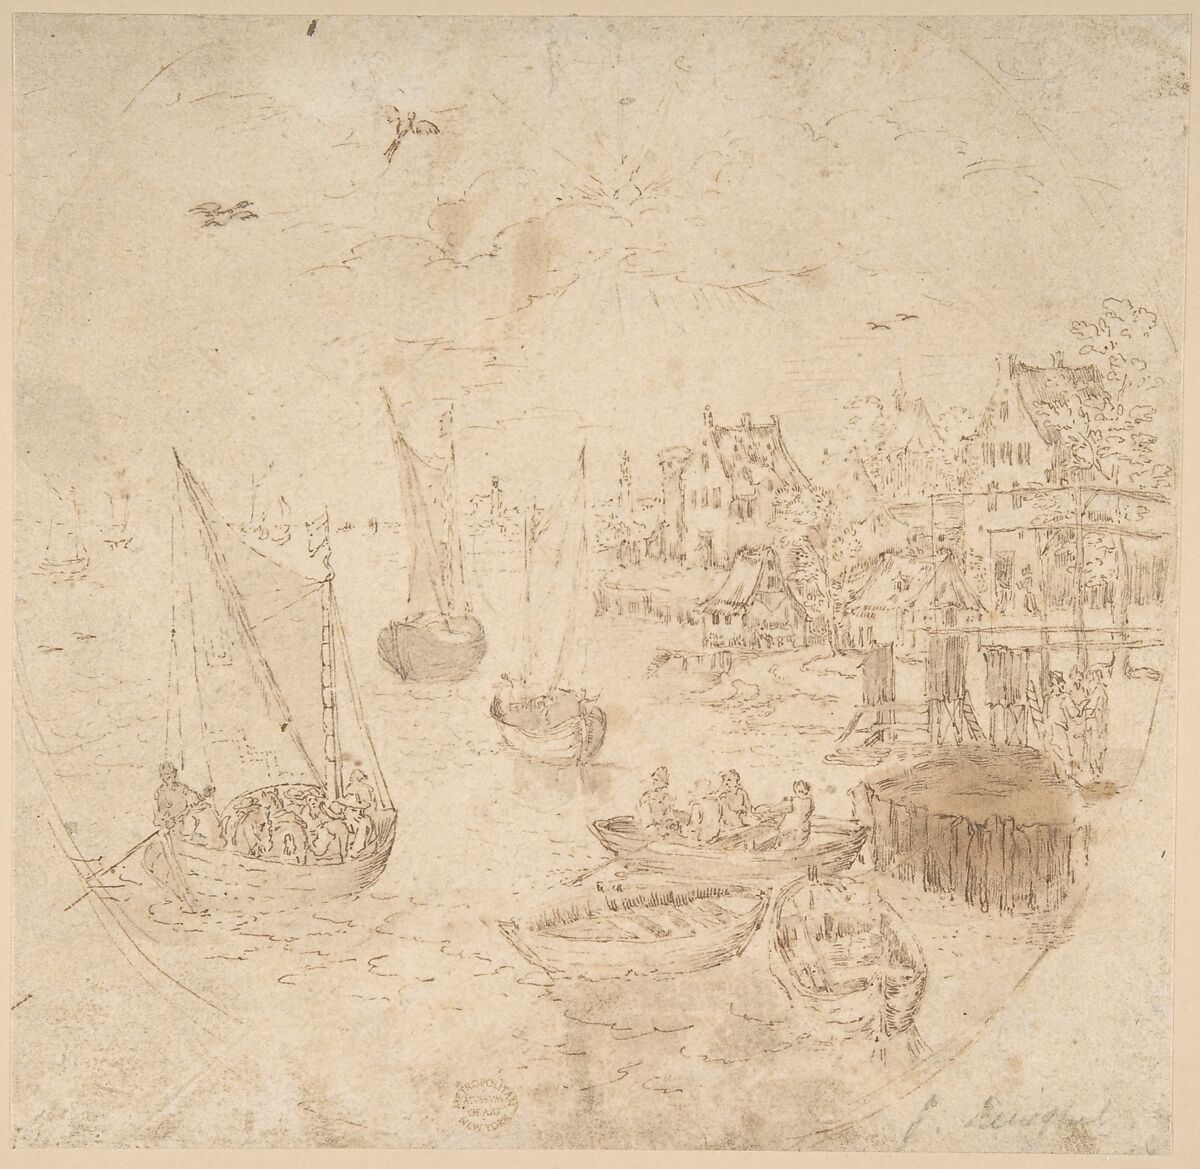 Boats and Houses, In the manner of Jan Brueghel the Elder (Netherlandish, Brussels 1568–1625 Antwerp), Pen and brown ink, brown wash (faded gray); circular framing lines lightly sketched in pen and brown ink 